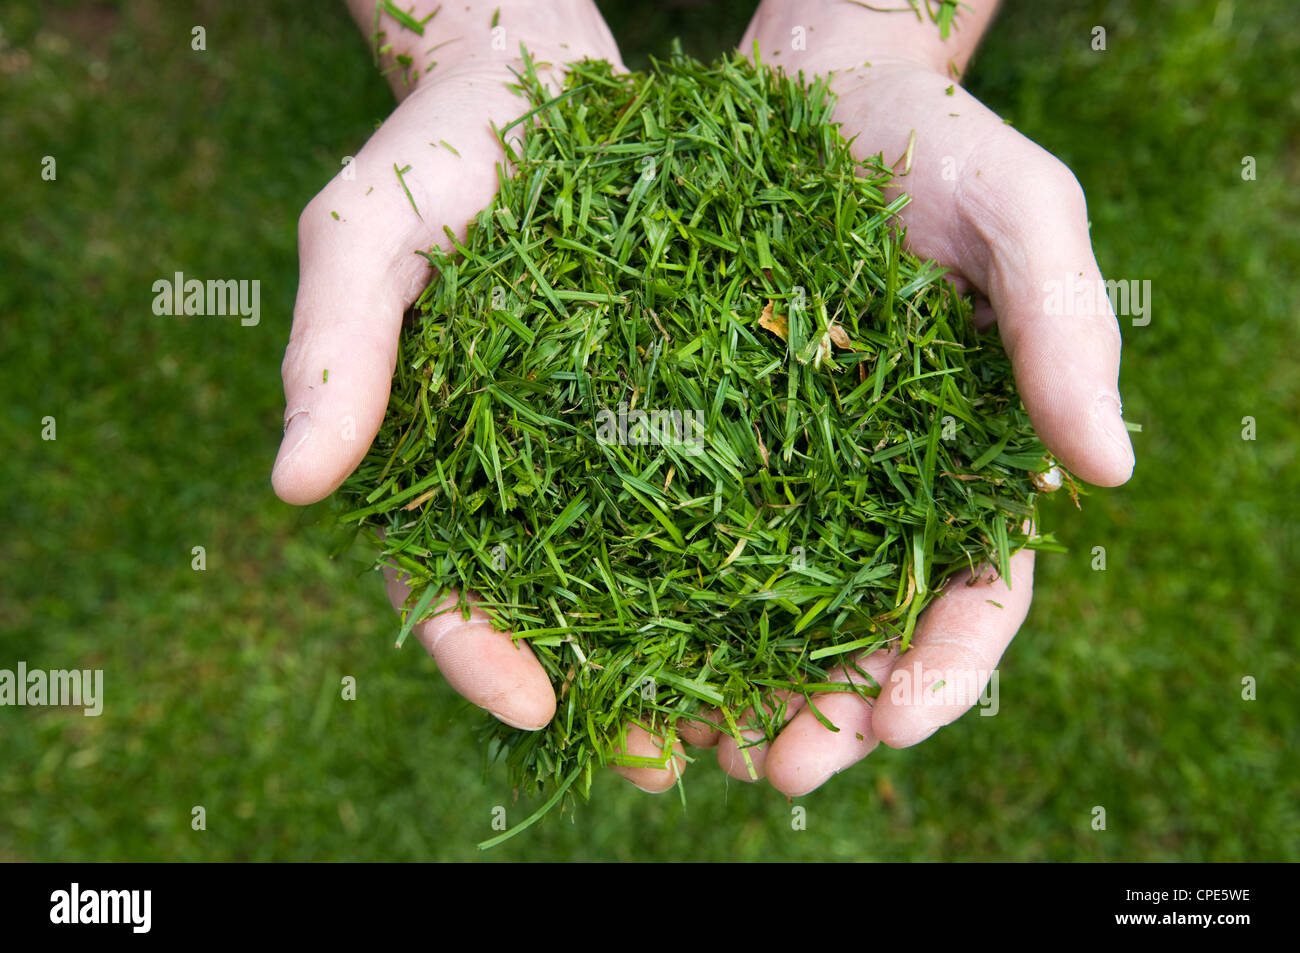 Close up of Caucasian mans hands holding freshly cut grass cuttings Stock Photo